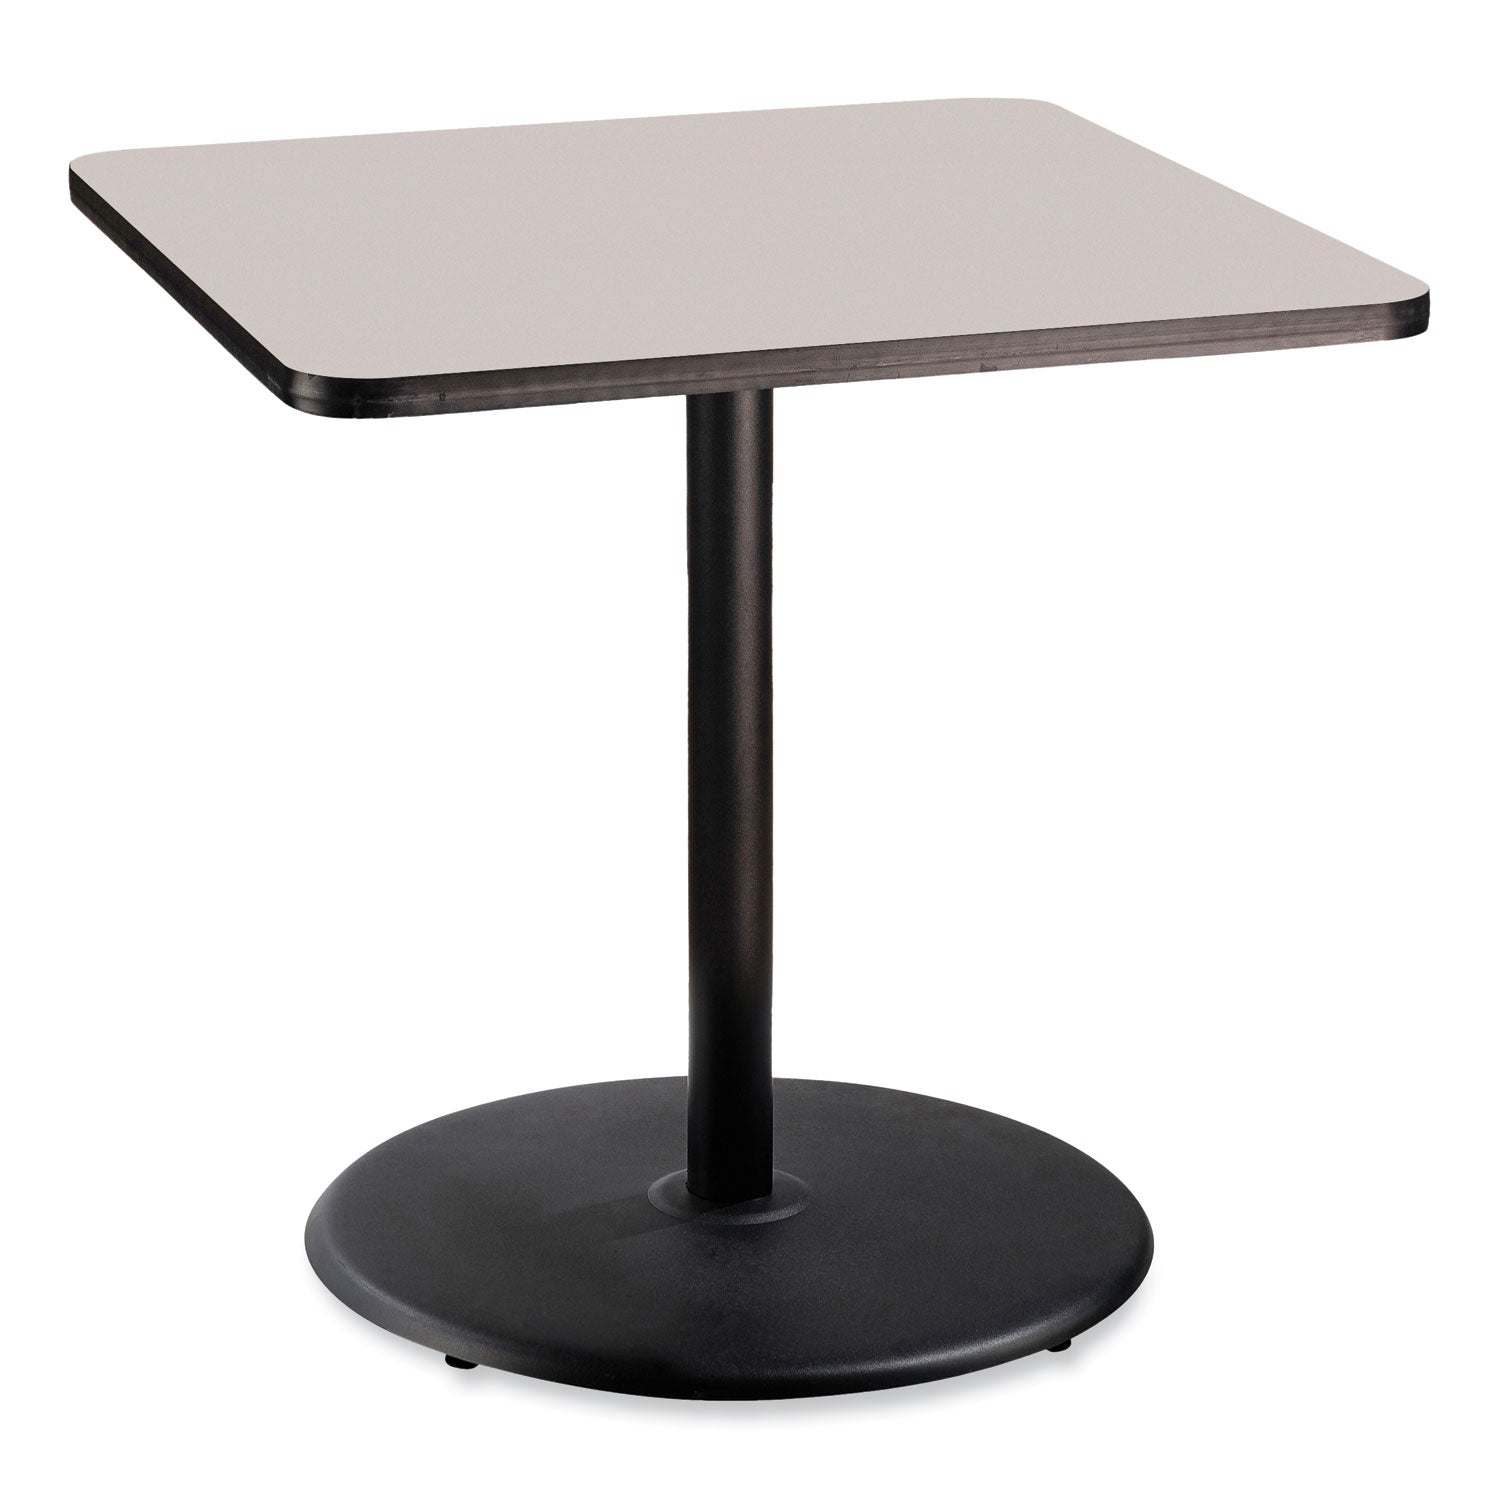 cafe-table-36w-x-36d-x-36h-square-top-round-base-gray-nebula-top-black-base-ships-in-7-10-business-days_npsct33636rc1gy - 1